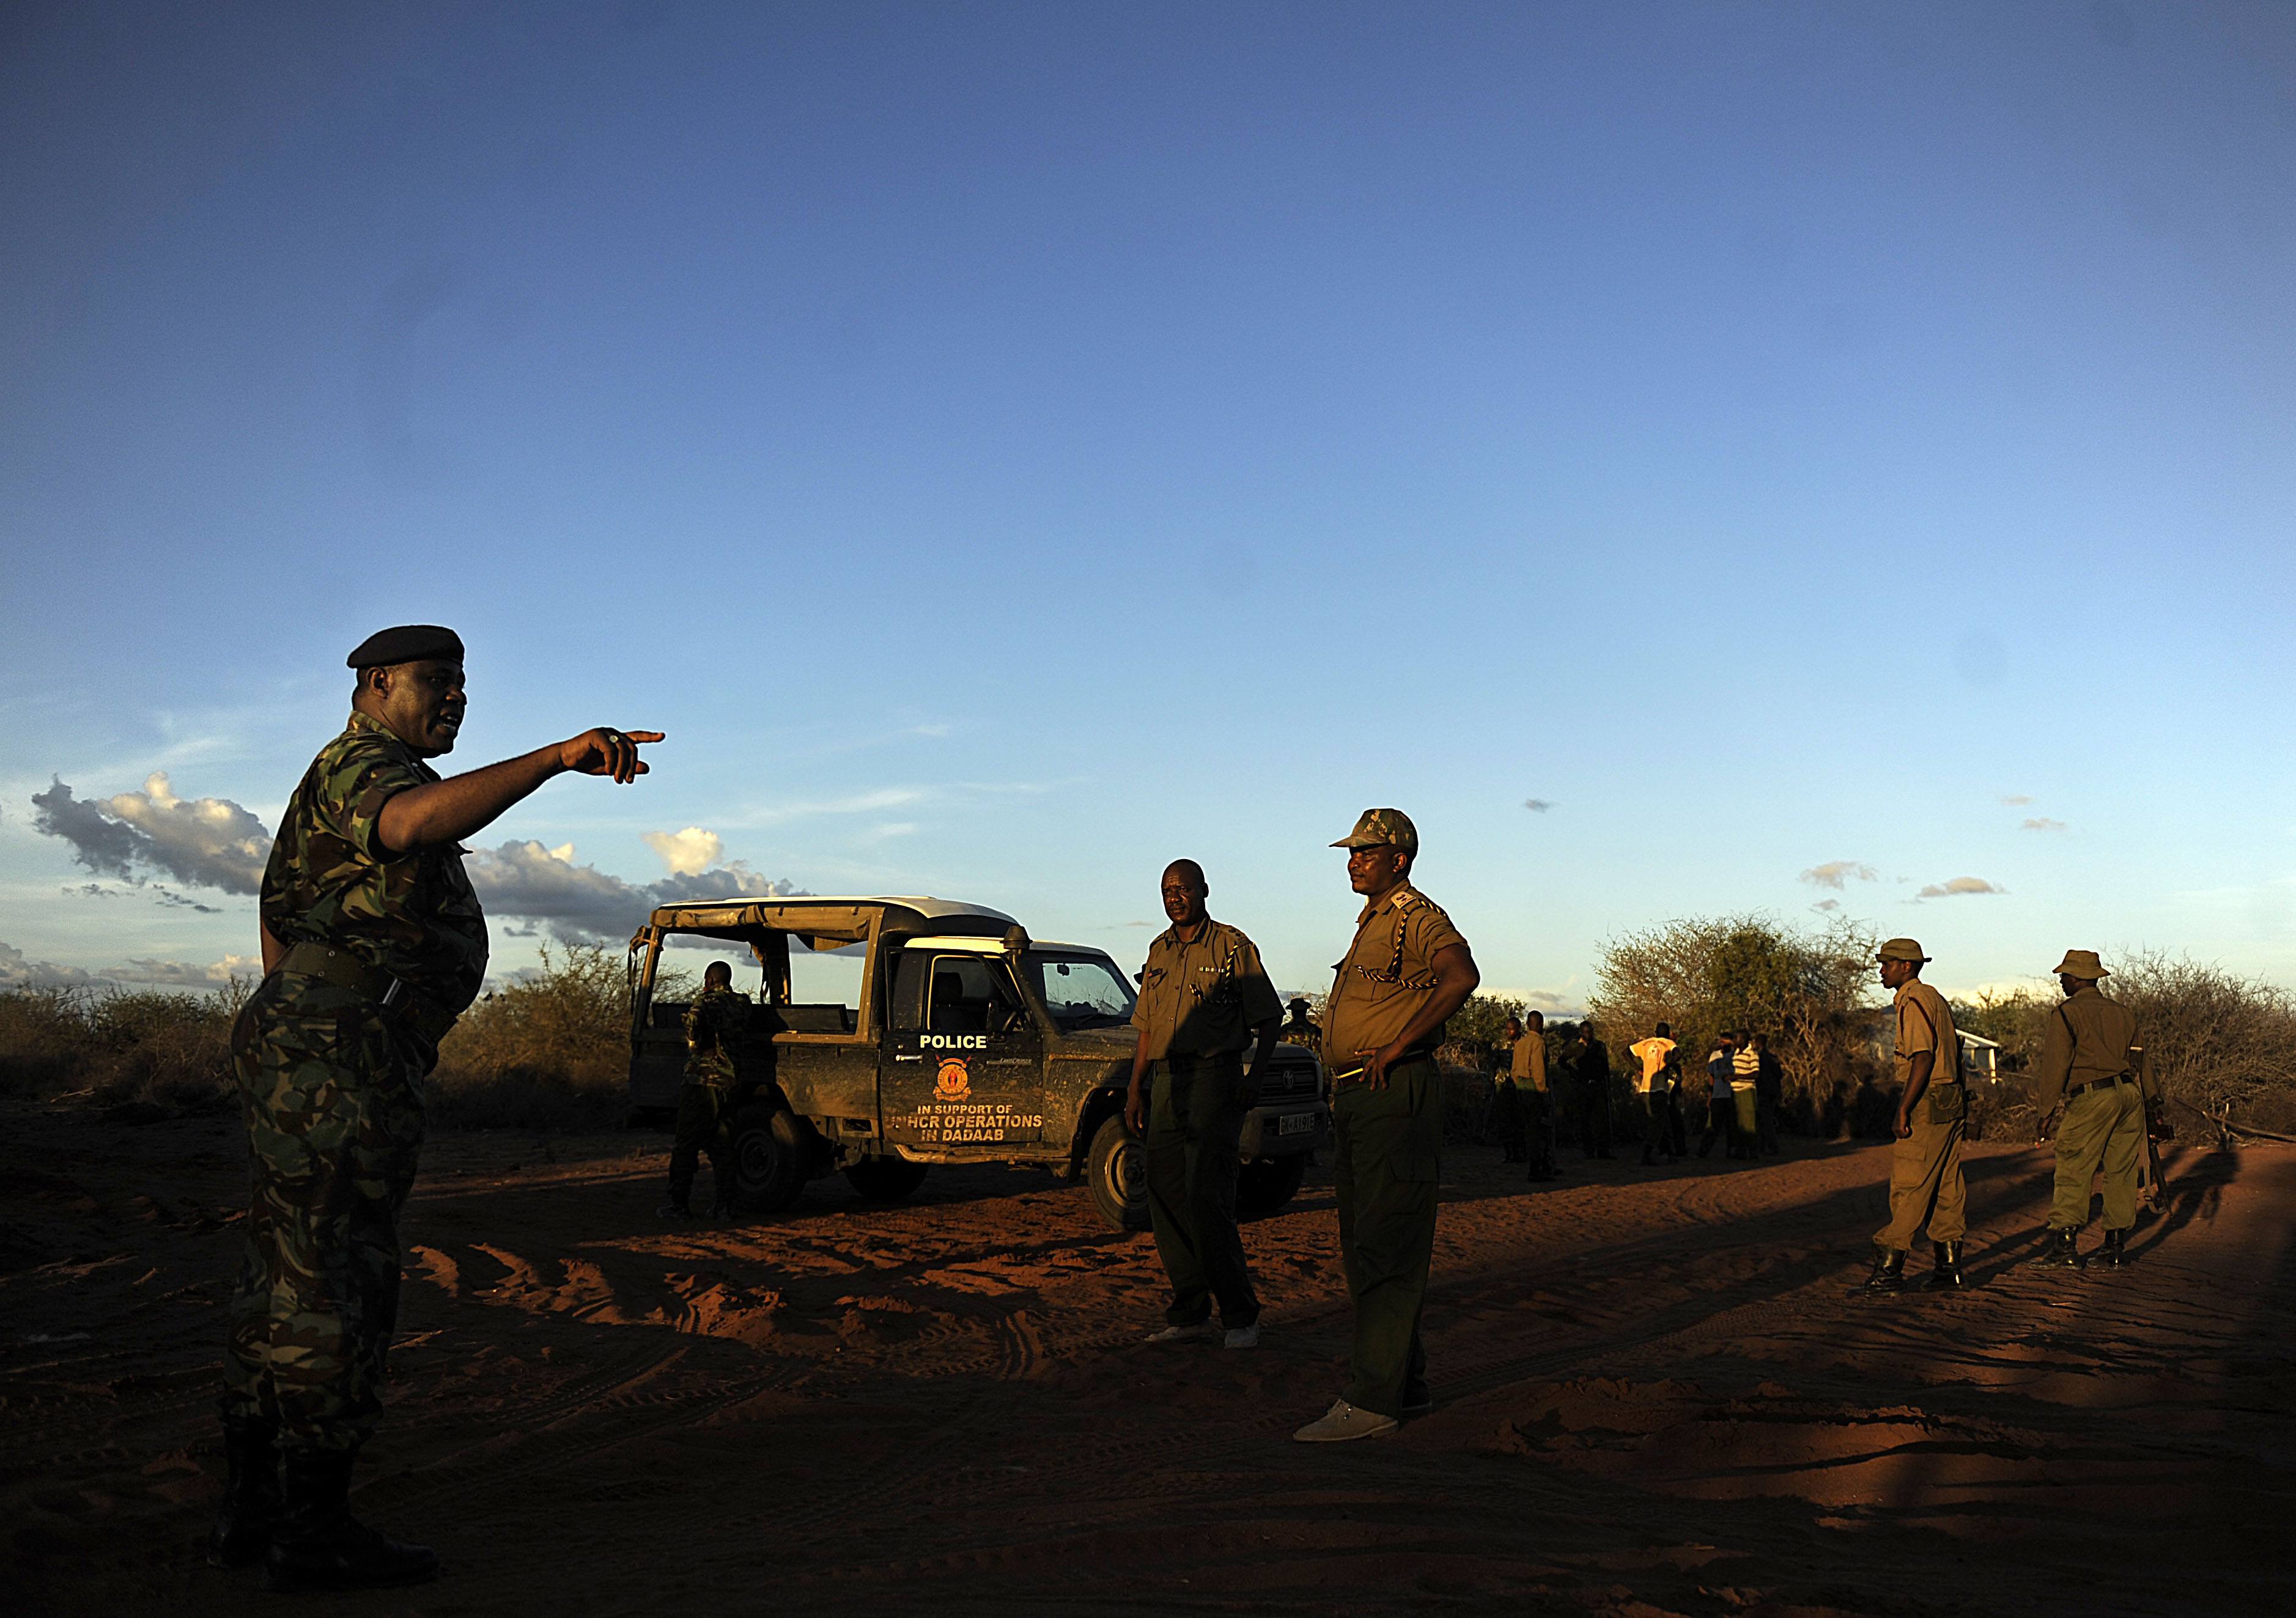 Kenyan security forces get instructions on October 15, 2011 during a search mission near Liboi, Kenya's border town with Somalia, where it is believed two Spanish aid workers kidnapped from Kenya's Dadaab refugee camp, in the company of five men of Somali appearance were last seen being marched towards the border. The Spaniards, both logistics officers with the aid group Medecins Sans Frontieres (MSF, Doctors Without Borders), are now believed to be in lawless Somalia. Kenyan forces will pursue gunmen accused of a spate of kidnappings of foreigners across the two nations' border, the internal security minister said on October 15. AFP PHOTO / TONY KARUMBA (Photo credit should read TONY KARUMBA/AFP/Getty Images)